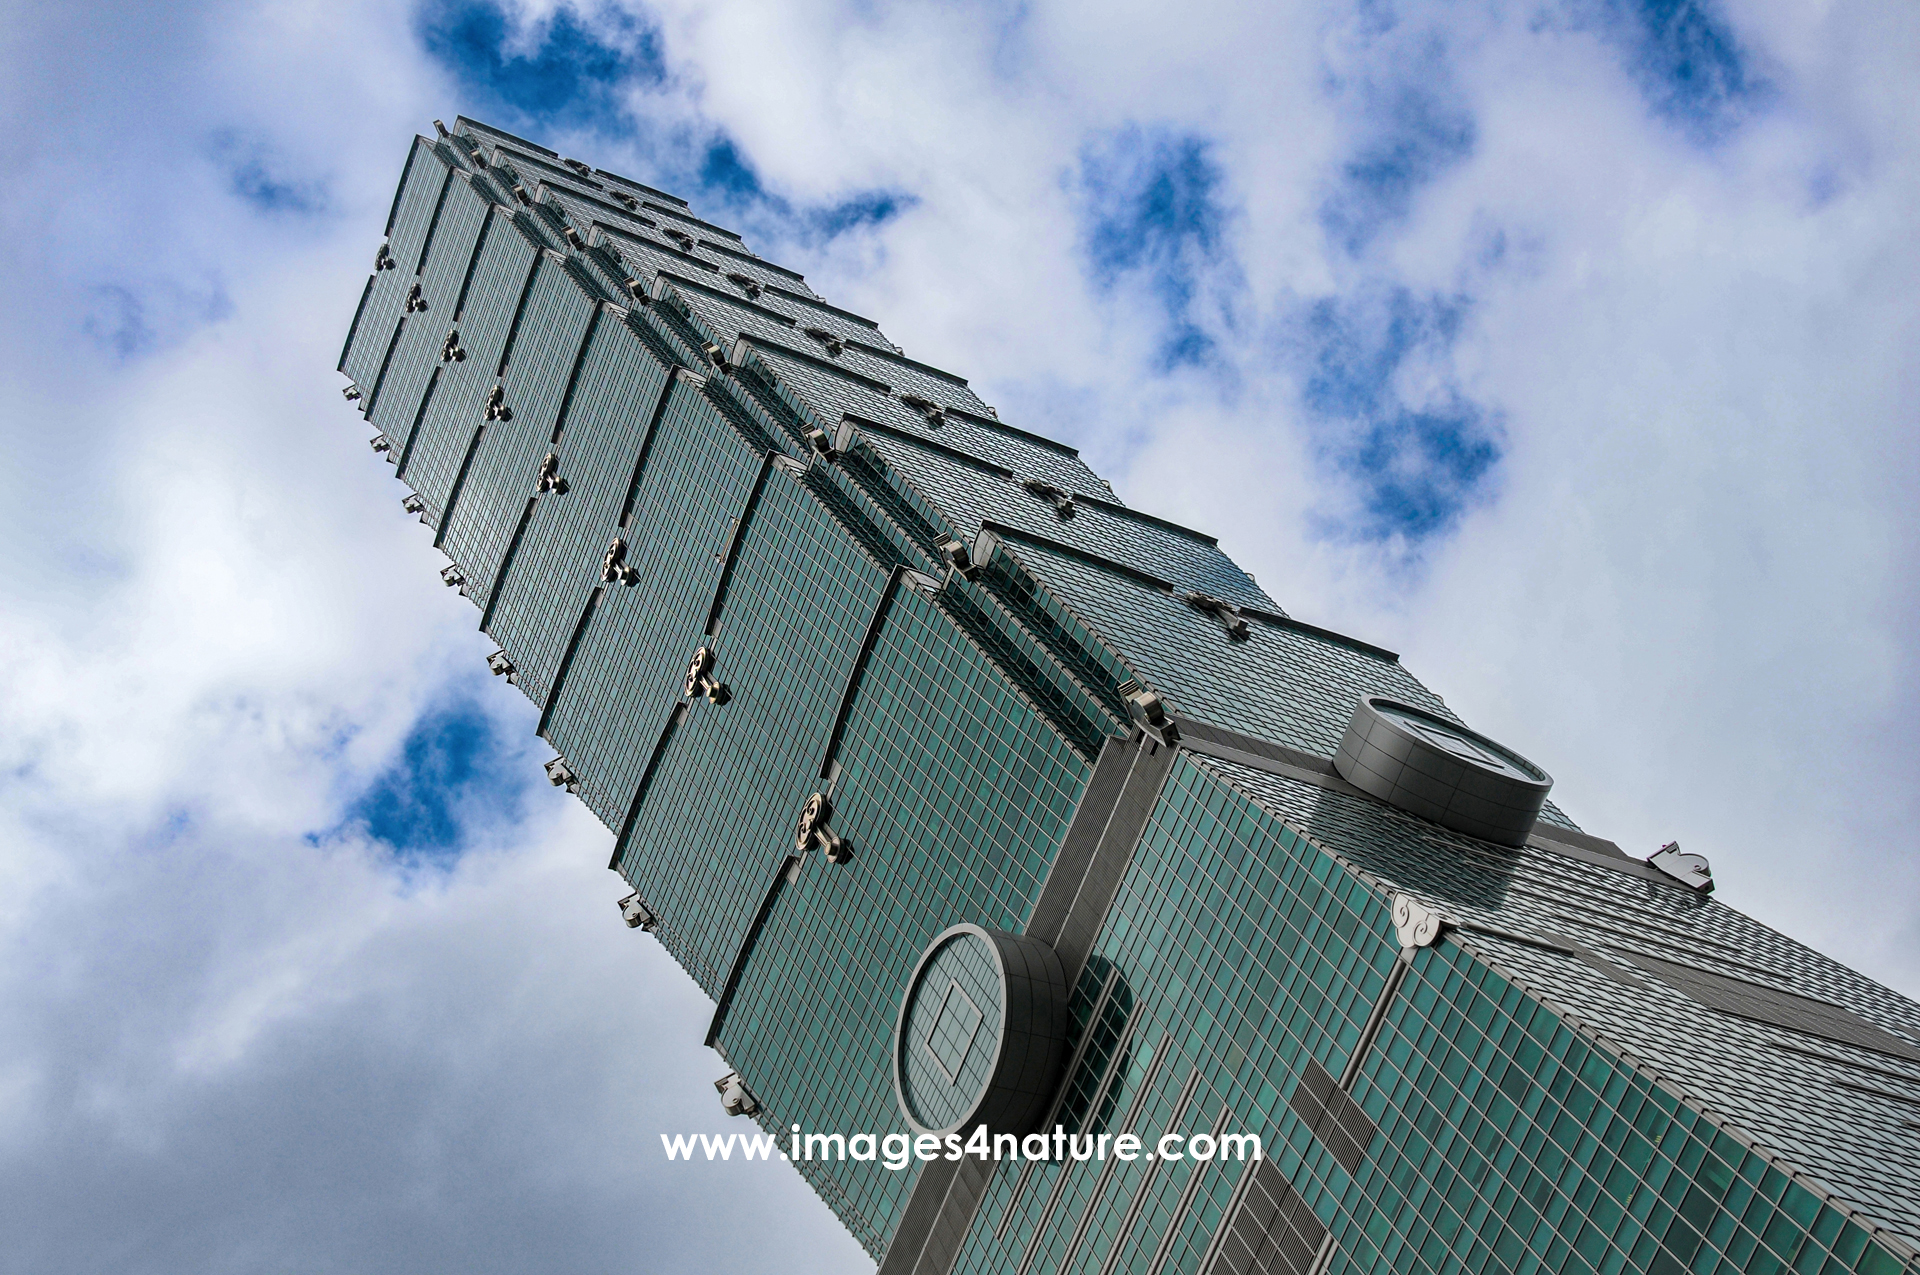 Vertical low angle view of Taipei 101 skyscaper against cloudy sky